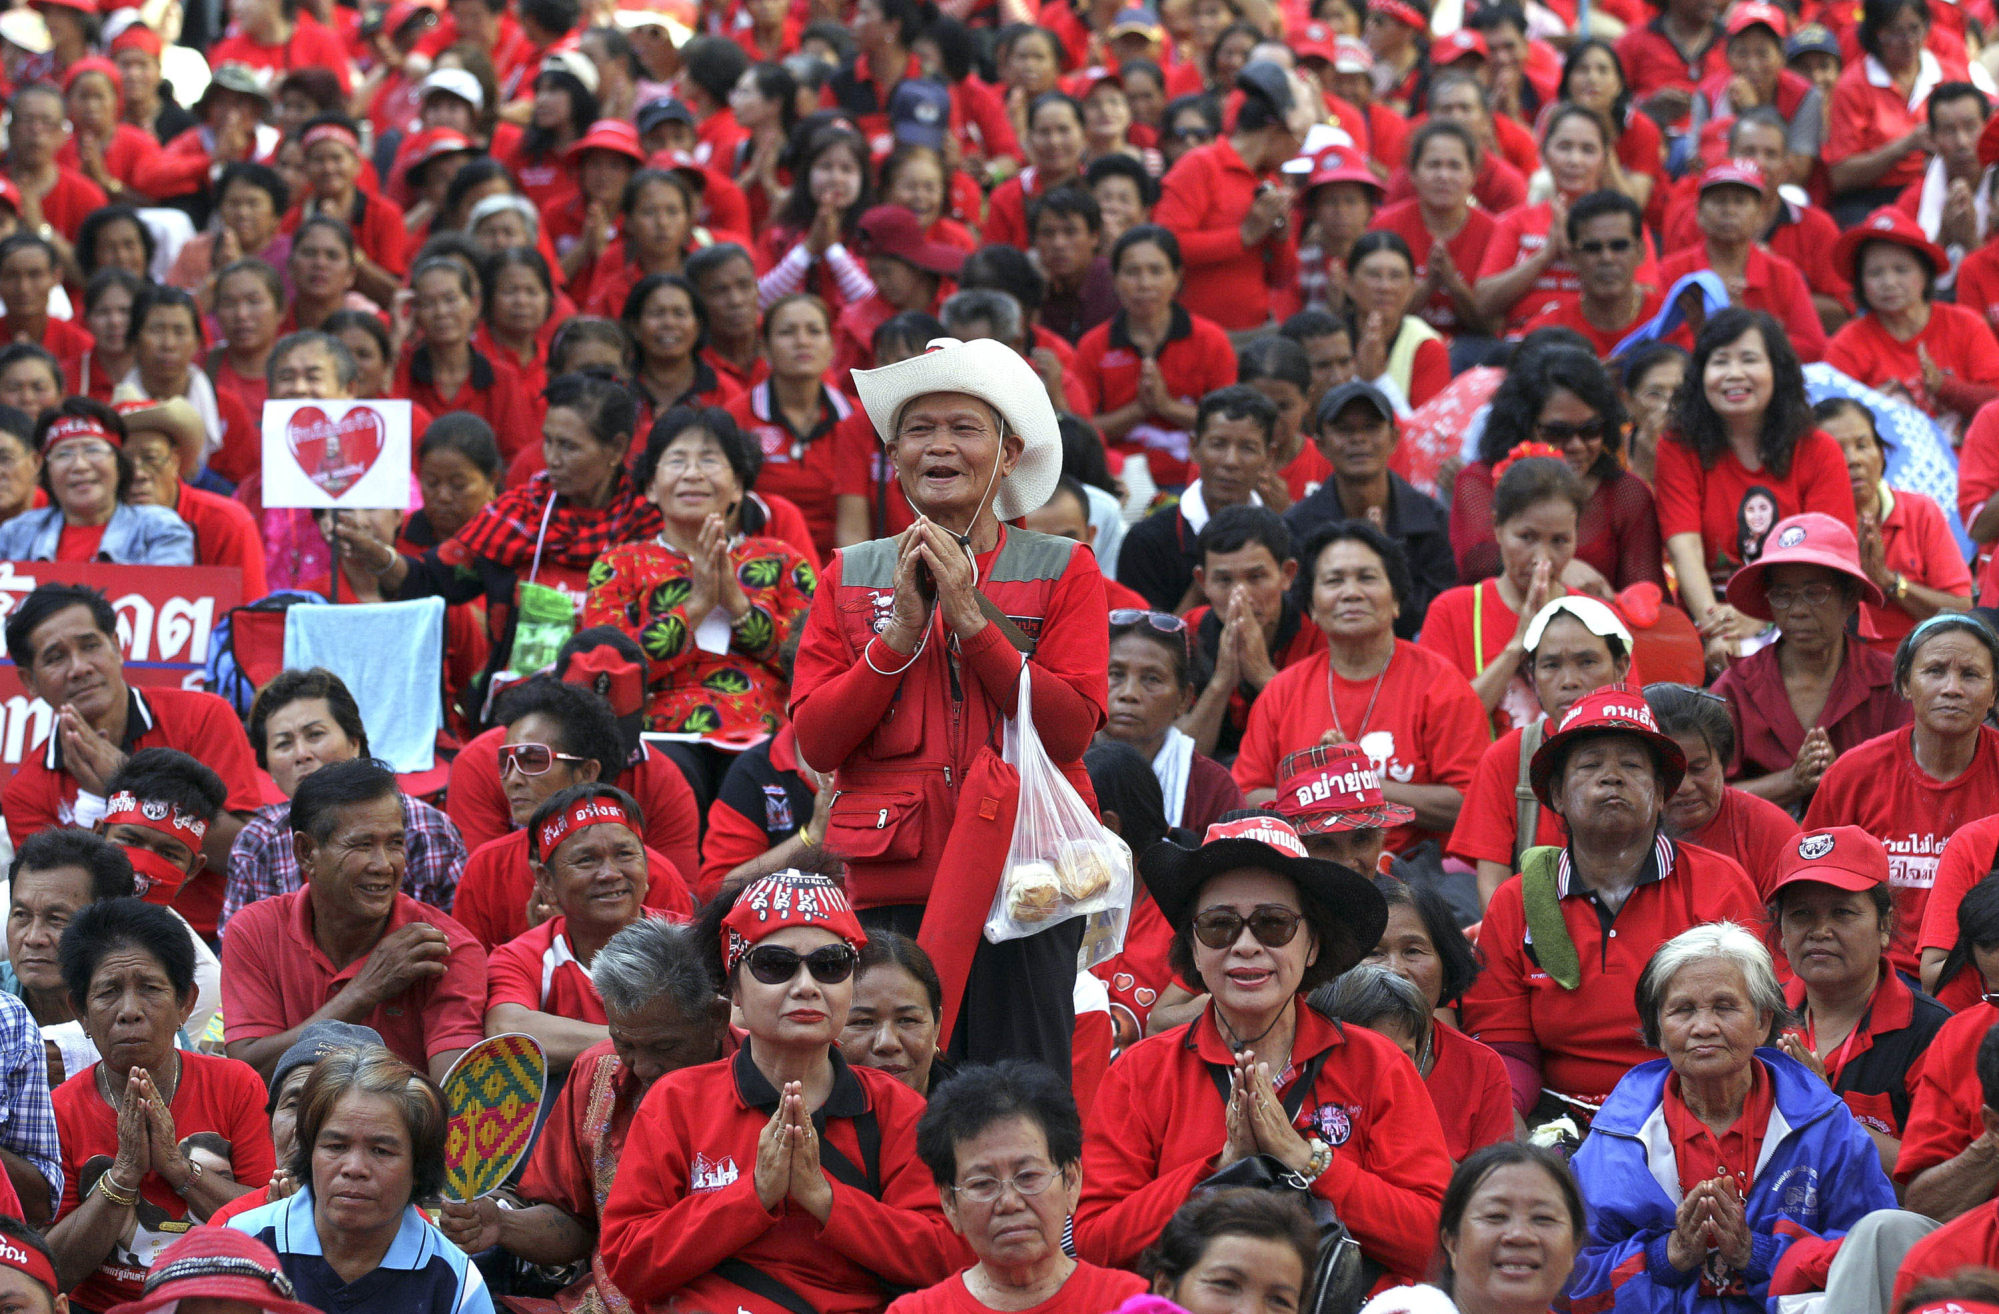 Pro-Thaksin protesters at a 2012 rally in Bangkok. The so-called “Red Shirts” powered him to two election wins in 2001 and then 2005. Photo: AP